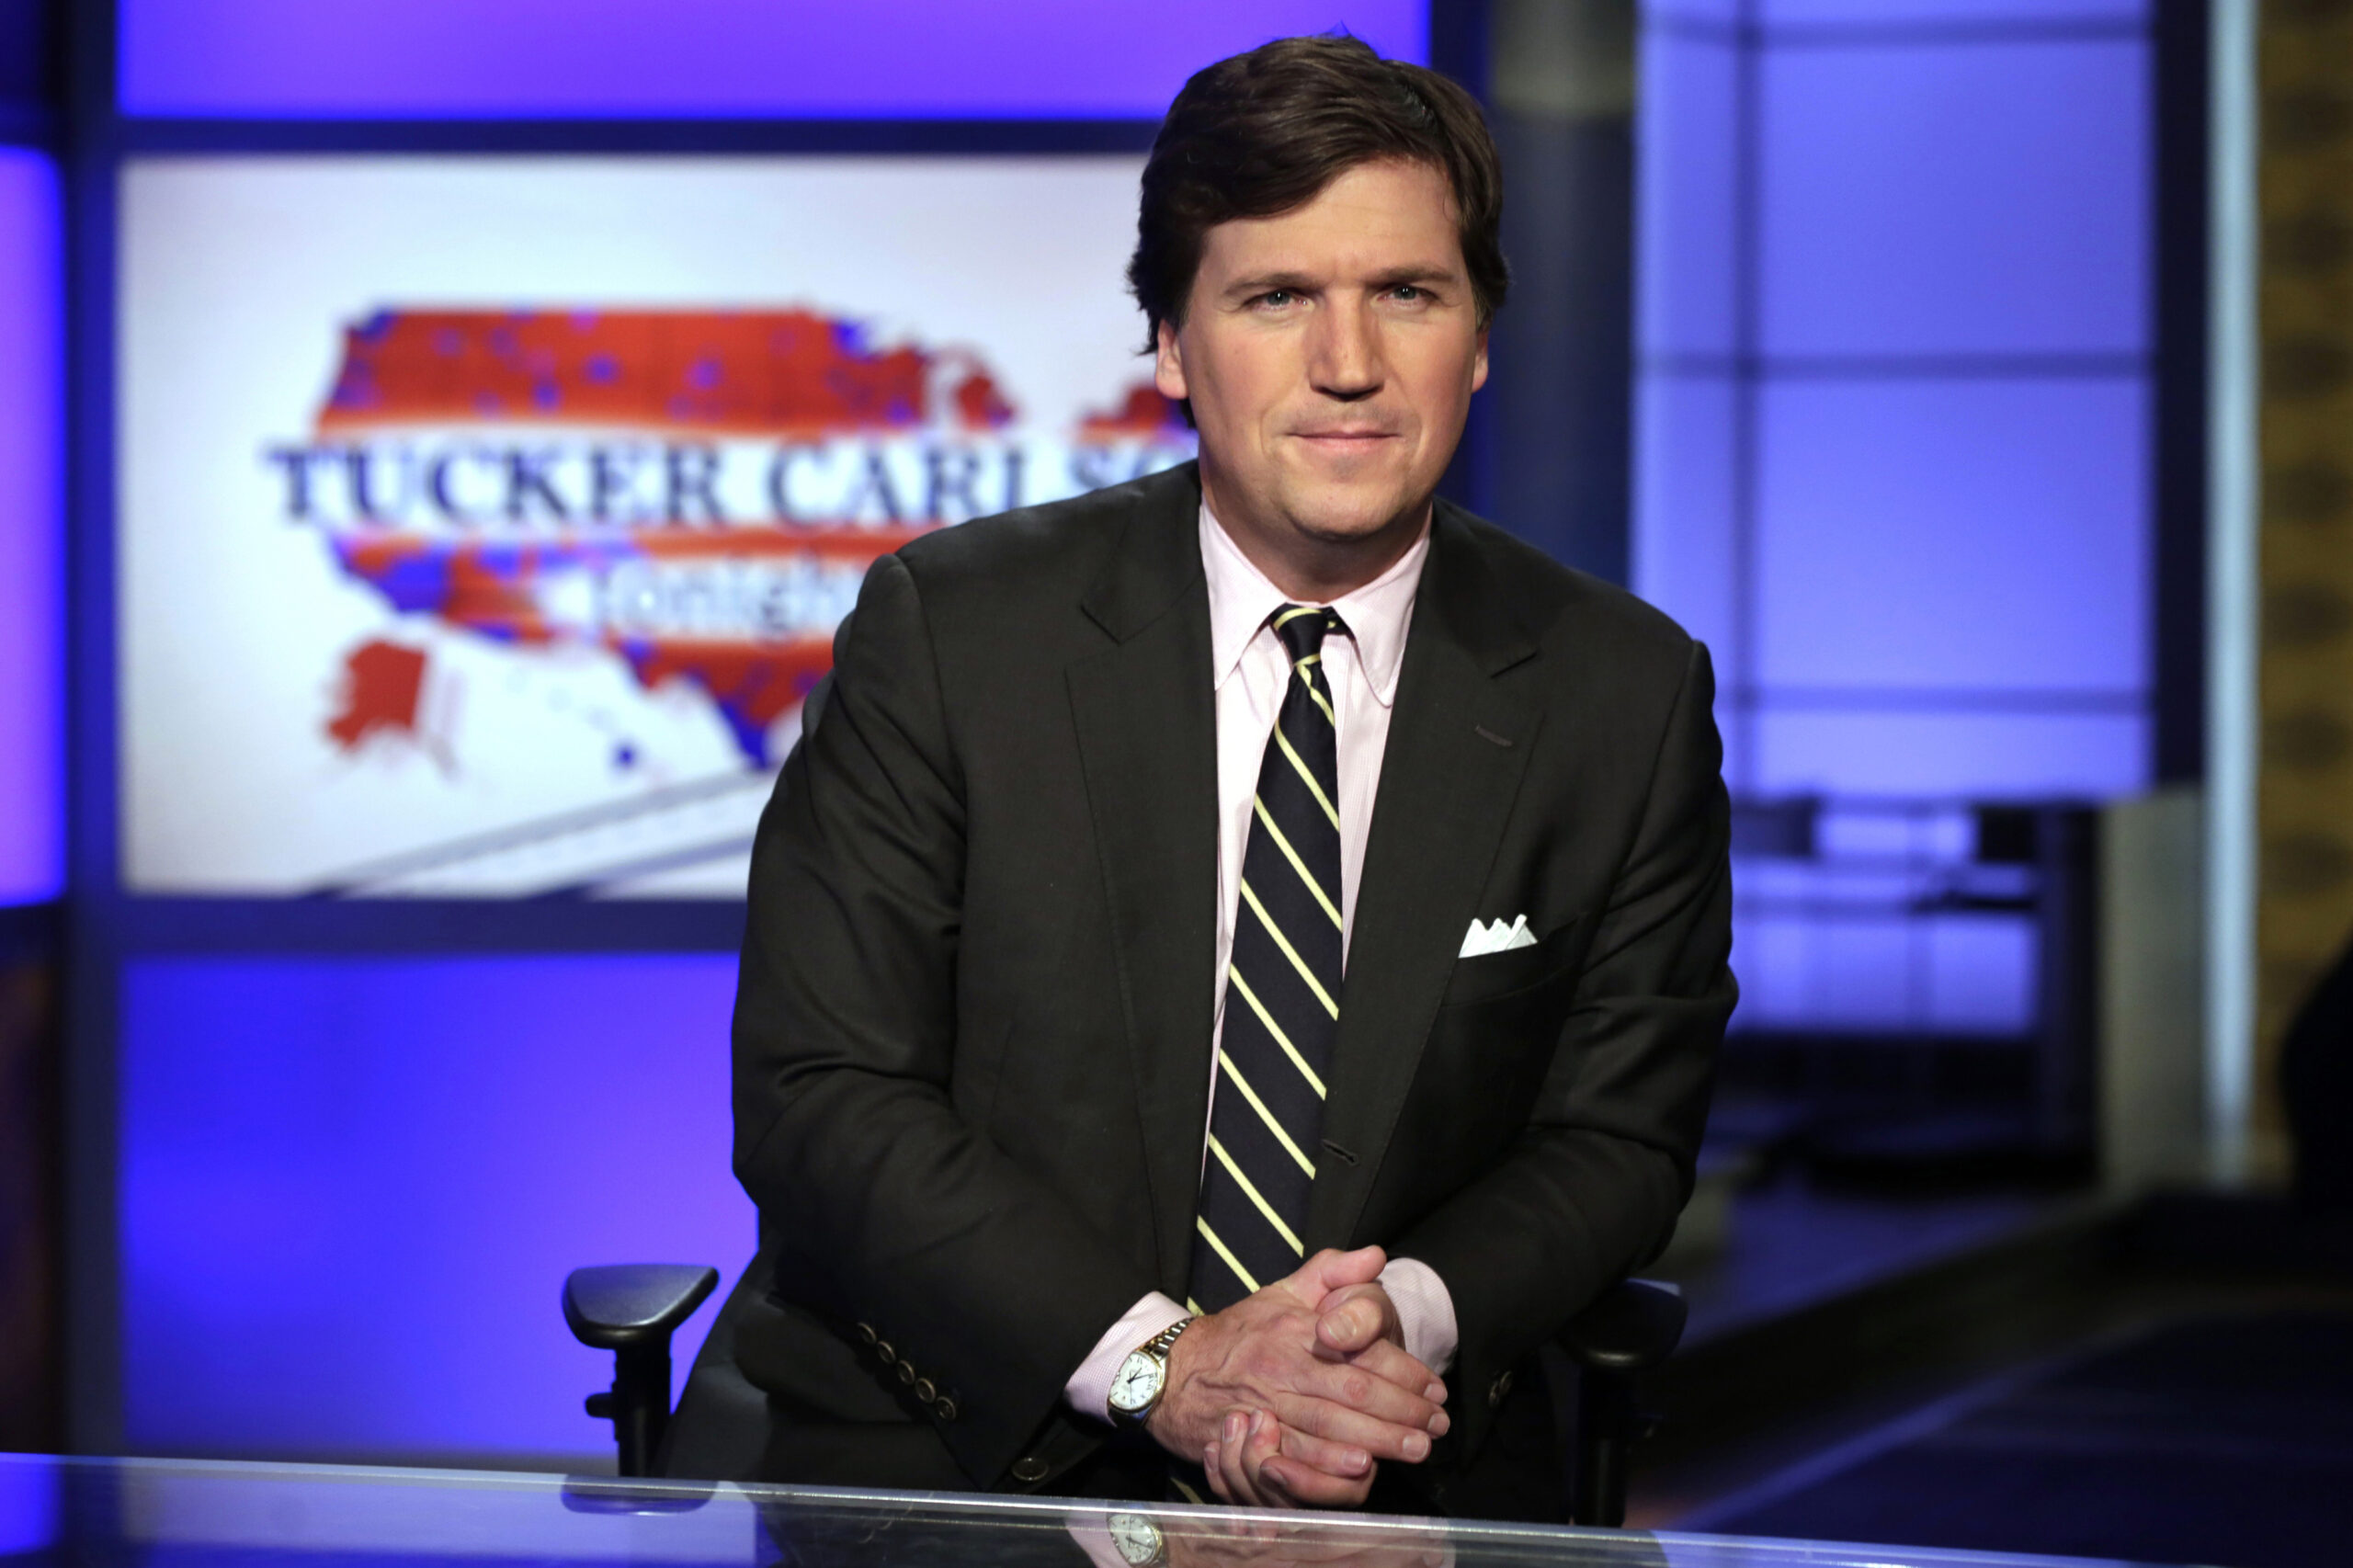 Views of Tucker Carlson Video Posted on Wednesday Surpass Viewers of Old Fox Time Slot in Less Than an Hour